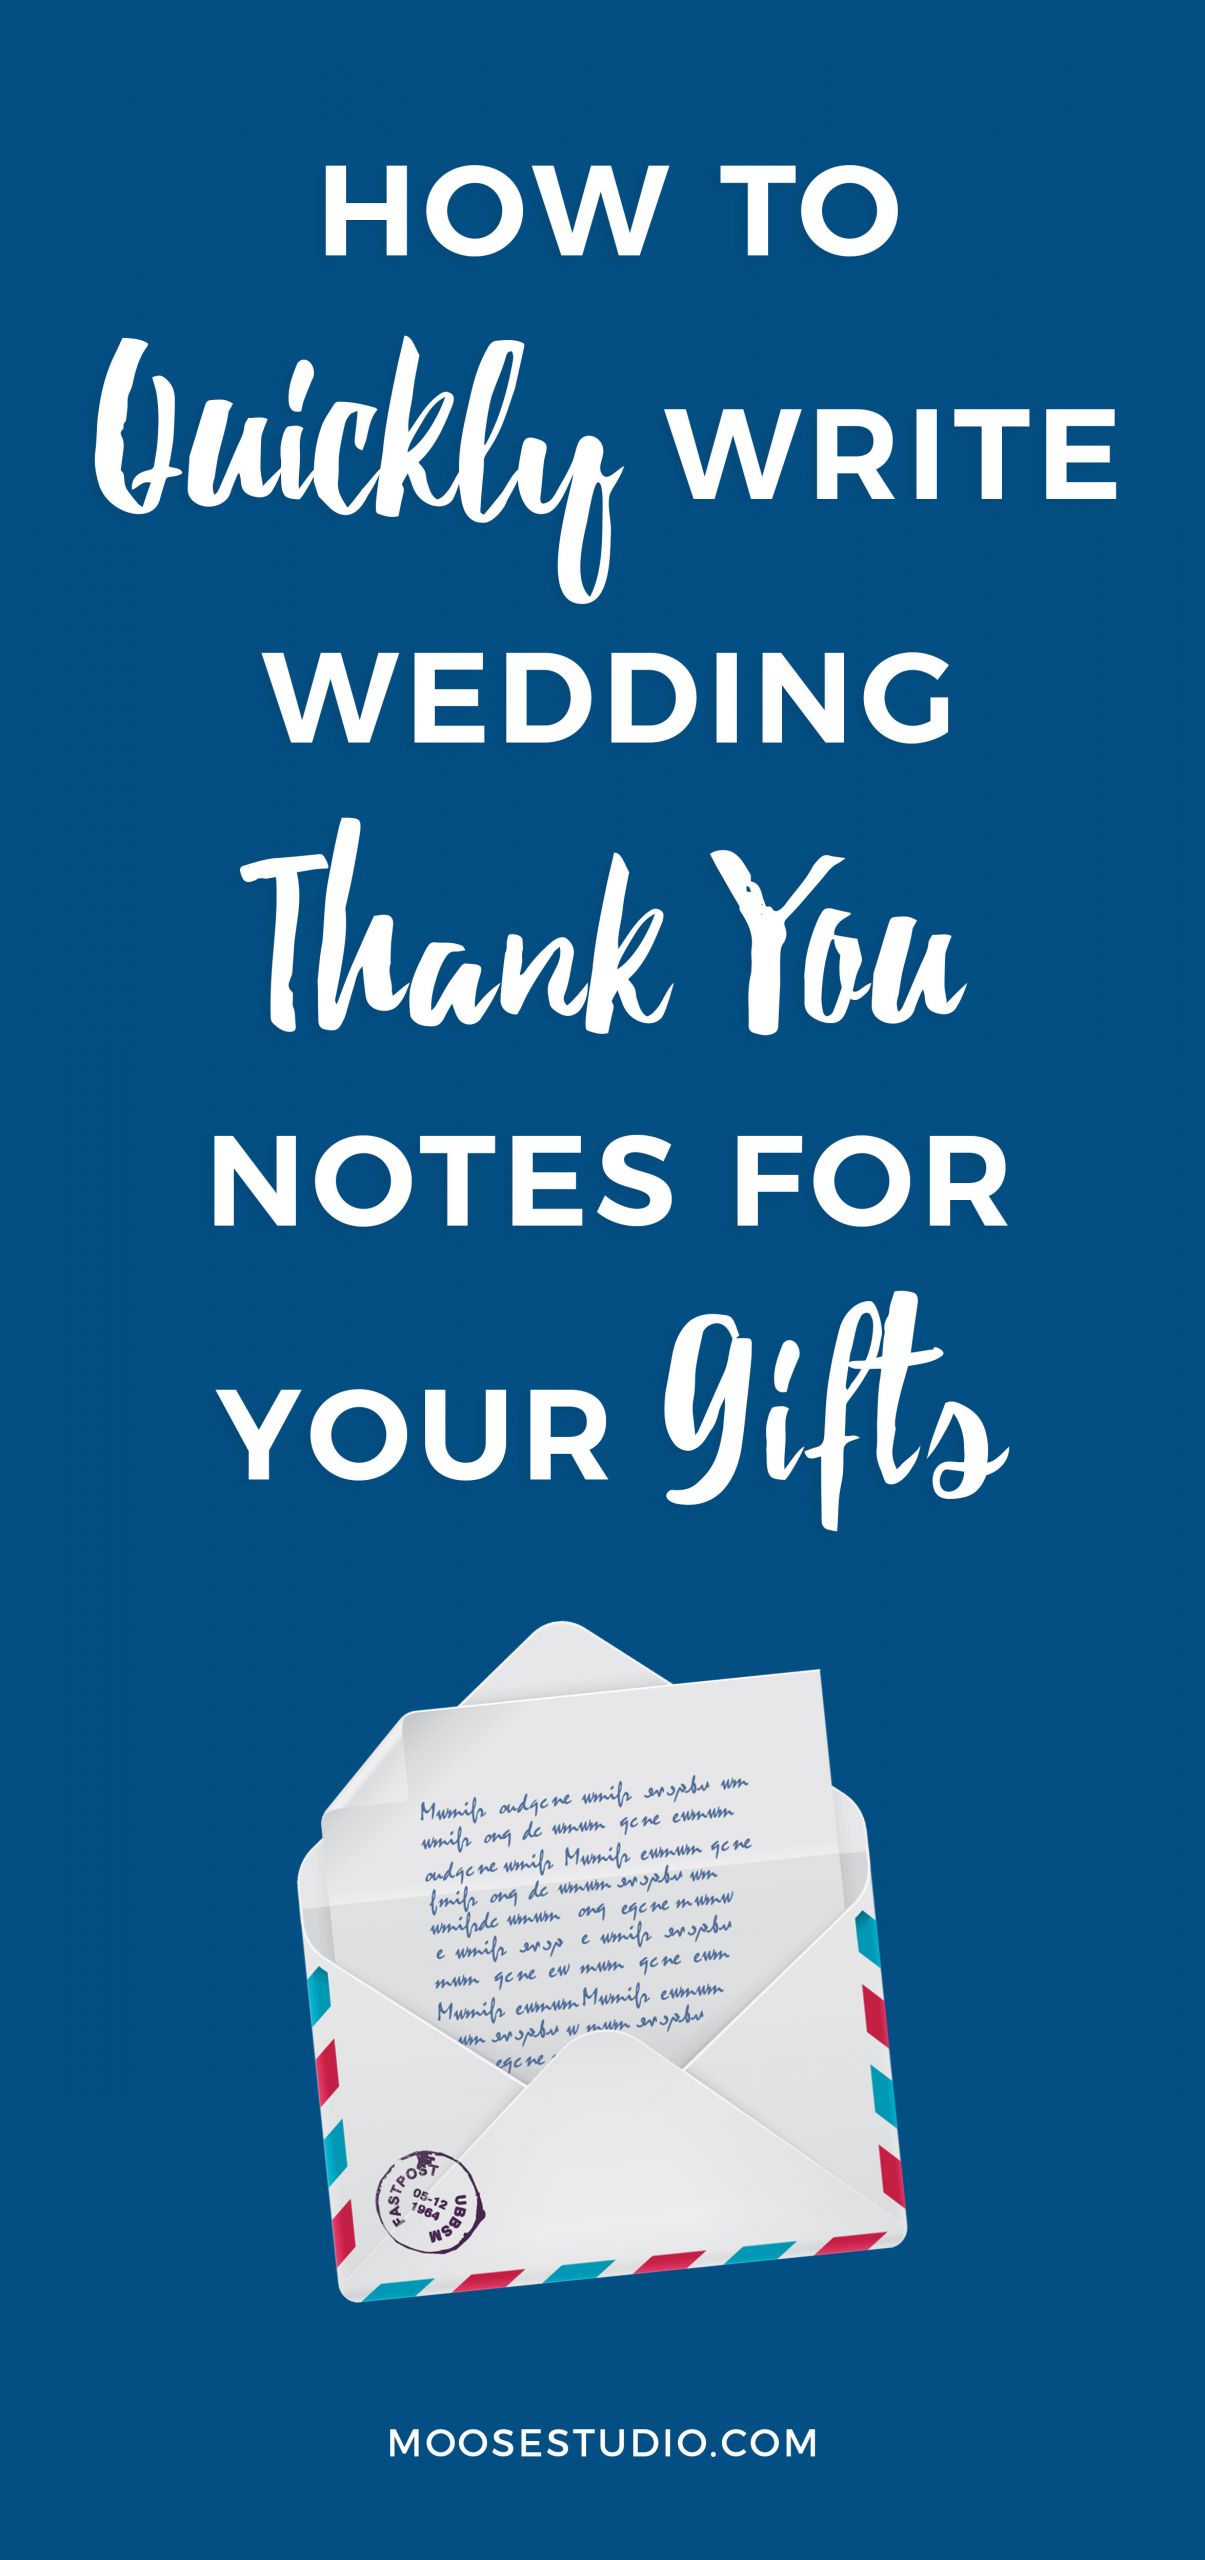 Thank You Notes For Wedding Gifts
 How To Quickly Conquer The Wording For Wedding Thank You Notes